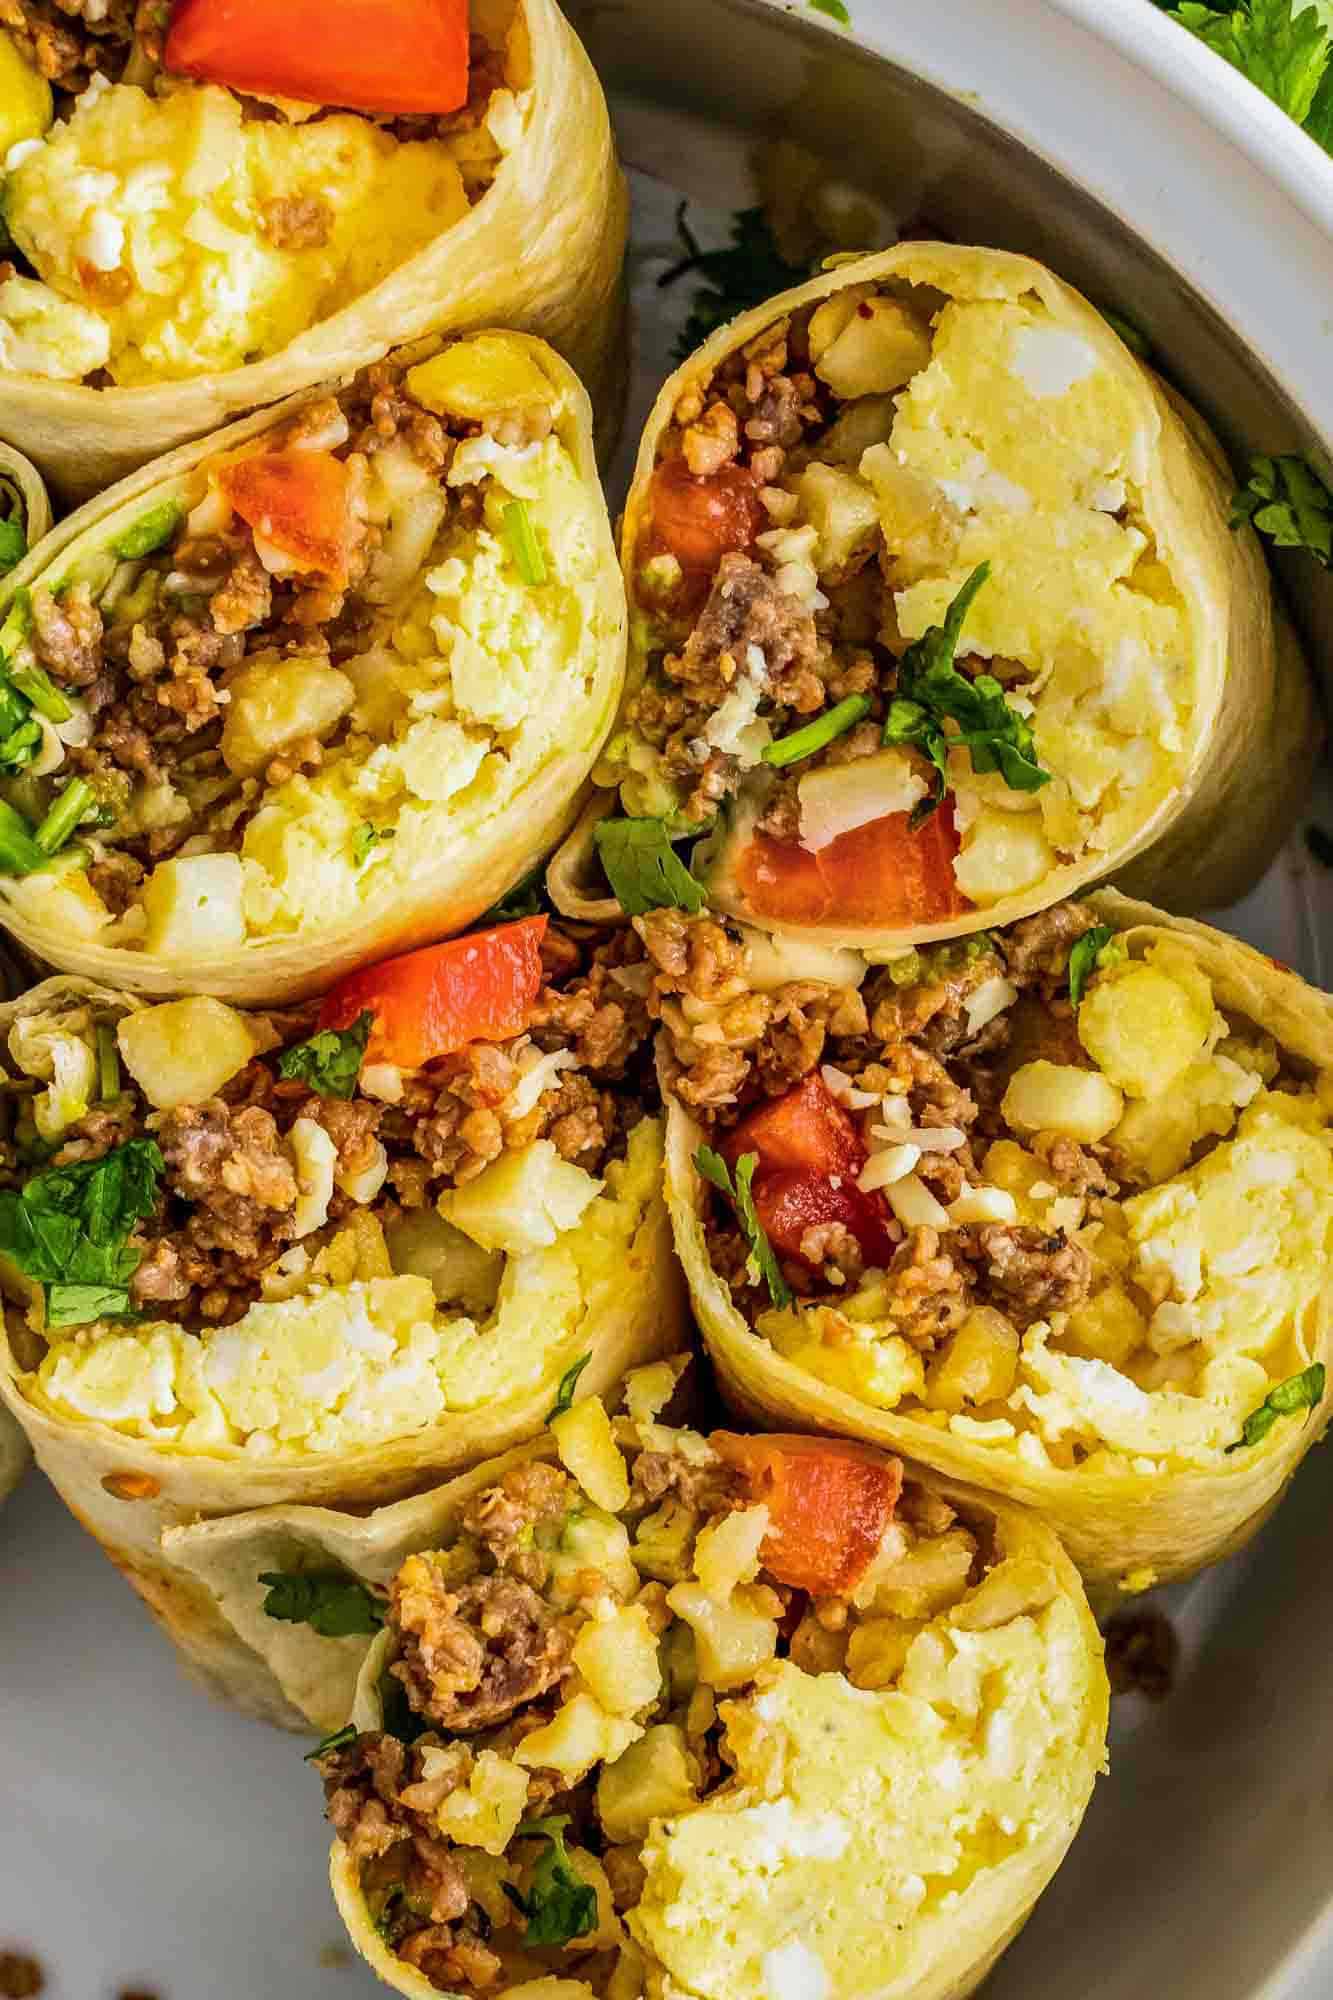 Six breakfast burrito halves placed in a large bowl, cut facing the camera